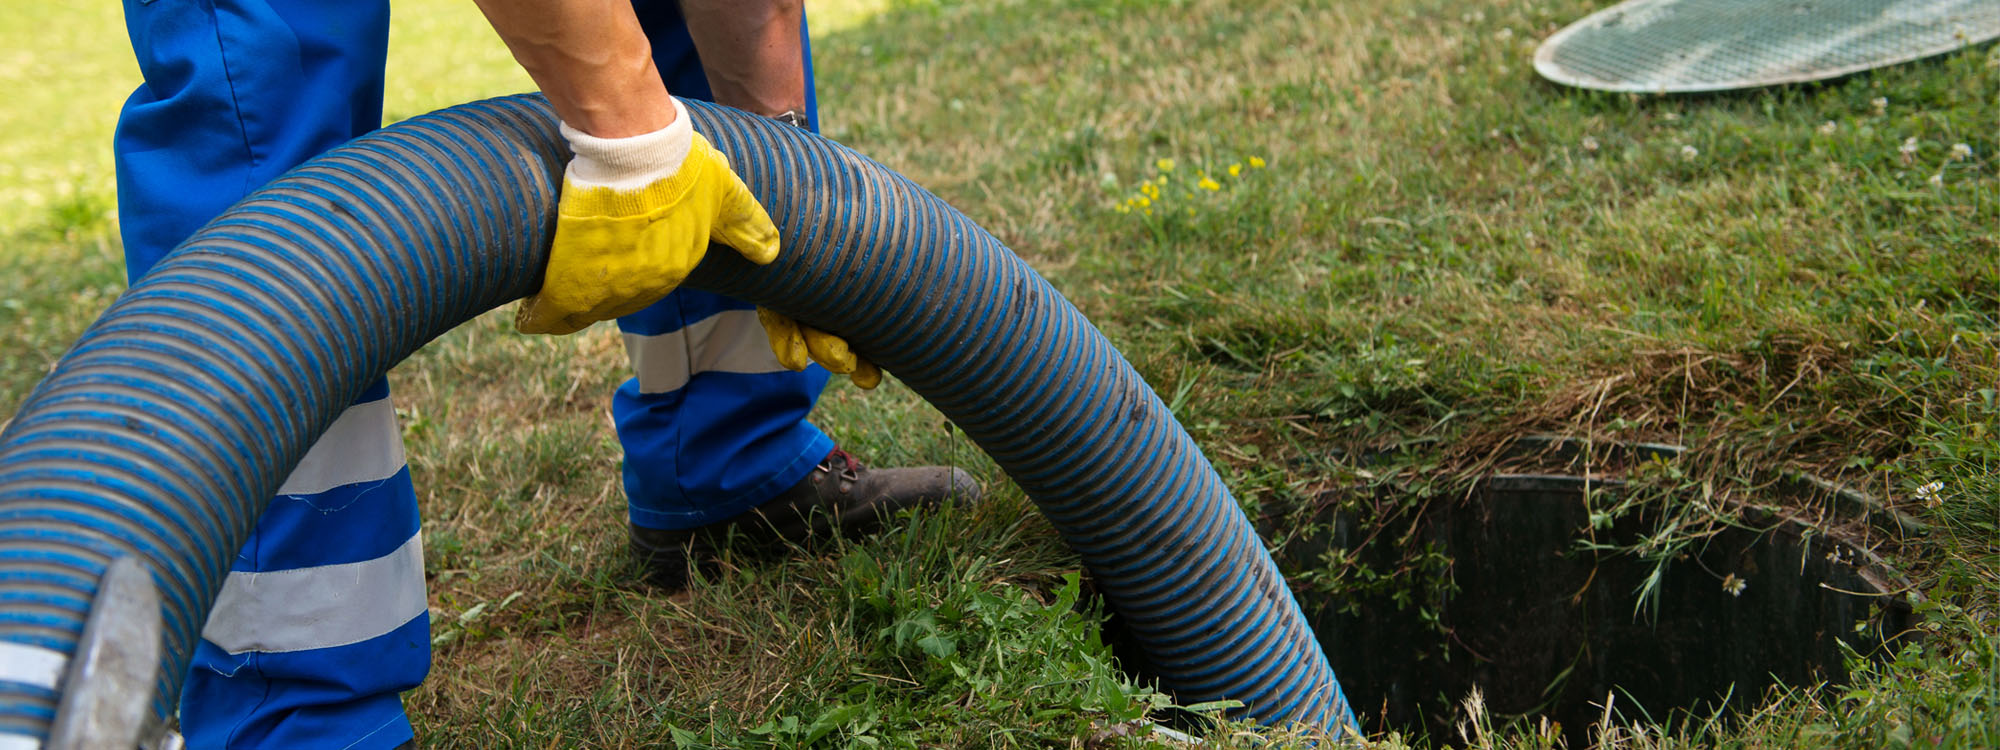 Man Pulling Pipe From a Septic Tank